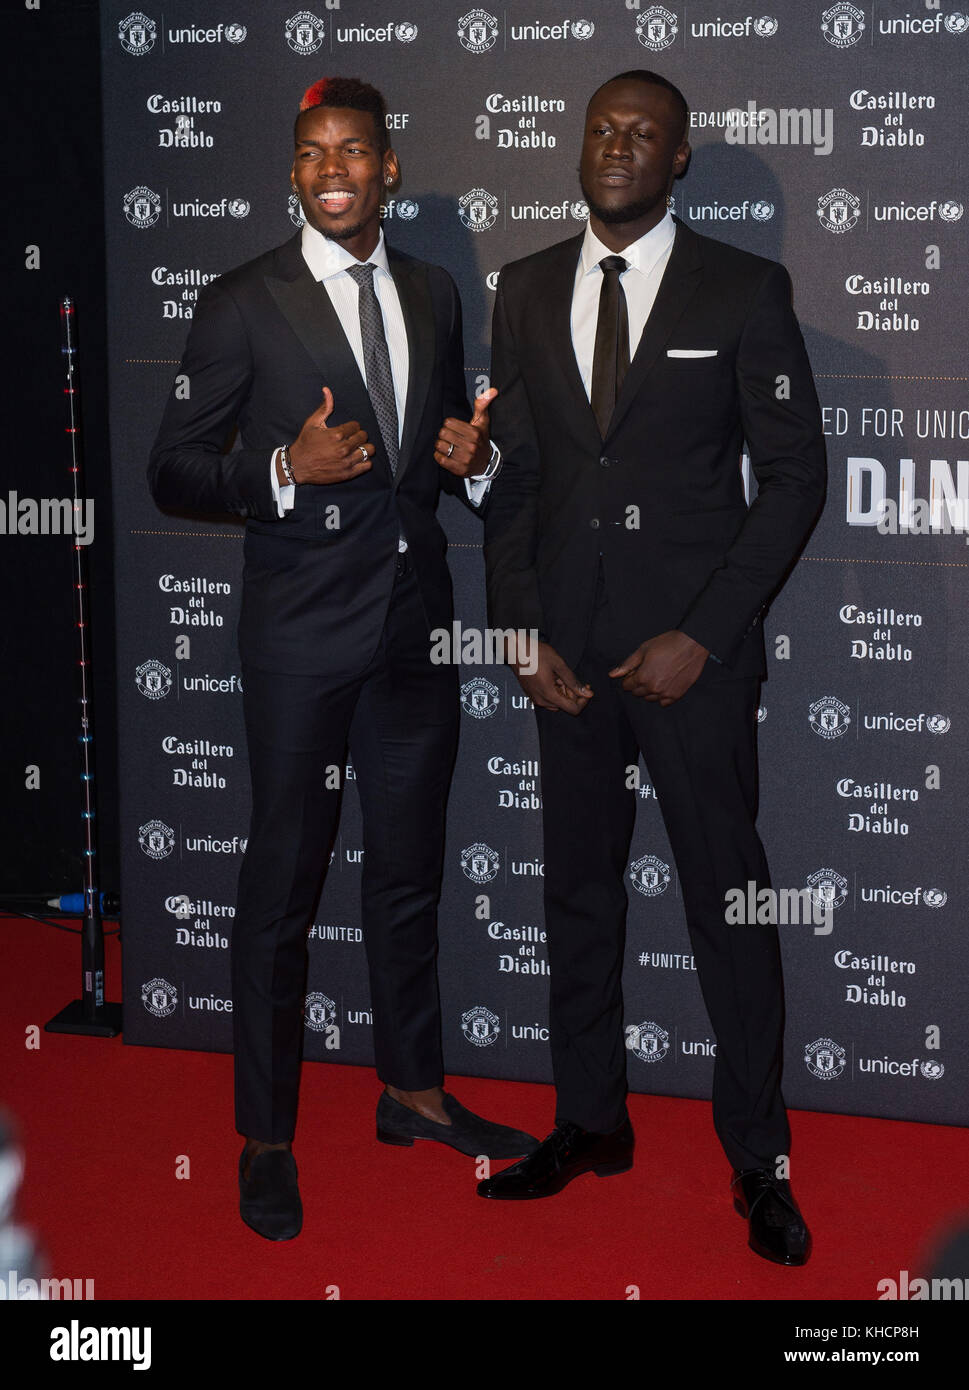 stormzy and pogba